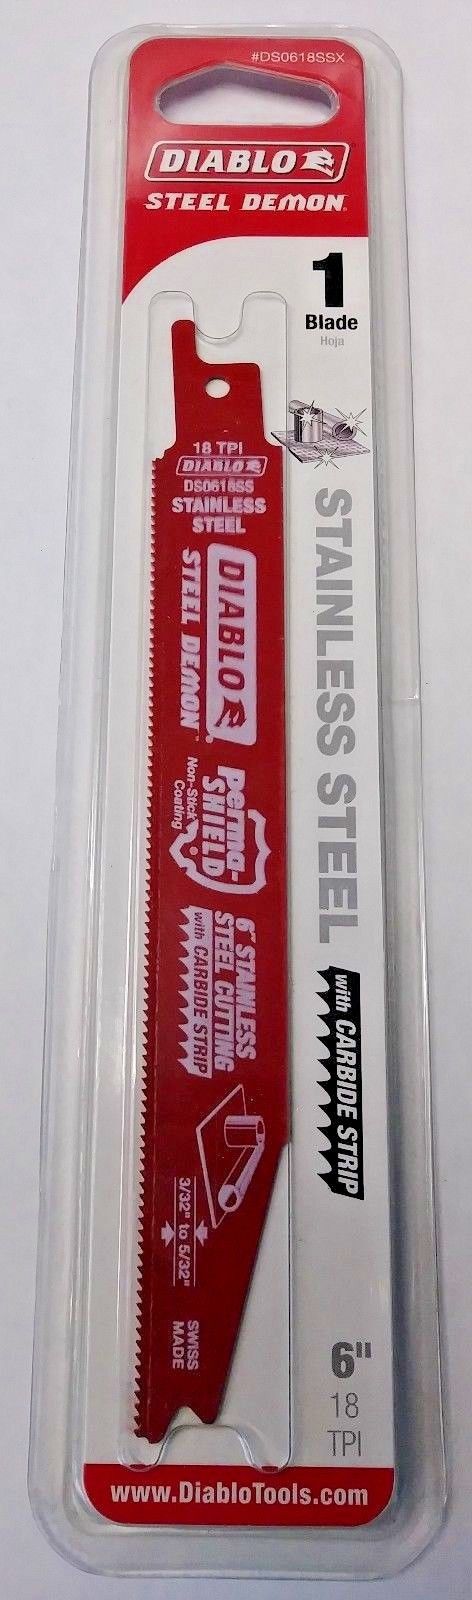 Diablo DS0618SSX 6" x 18 TPI Stainless Steel Cutting Reciprocating Saw Blade